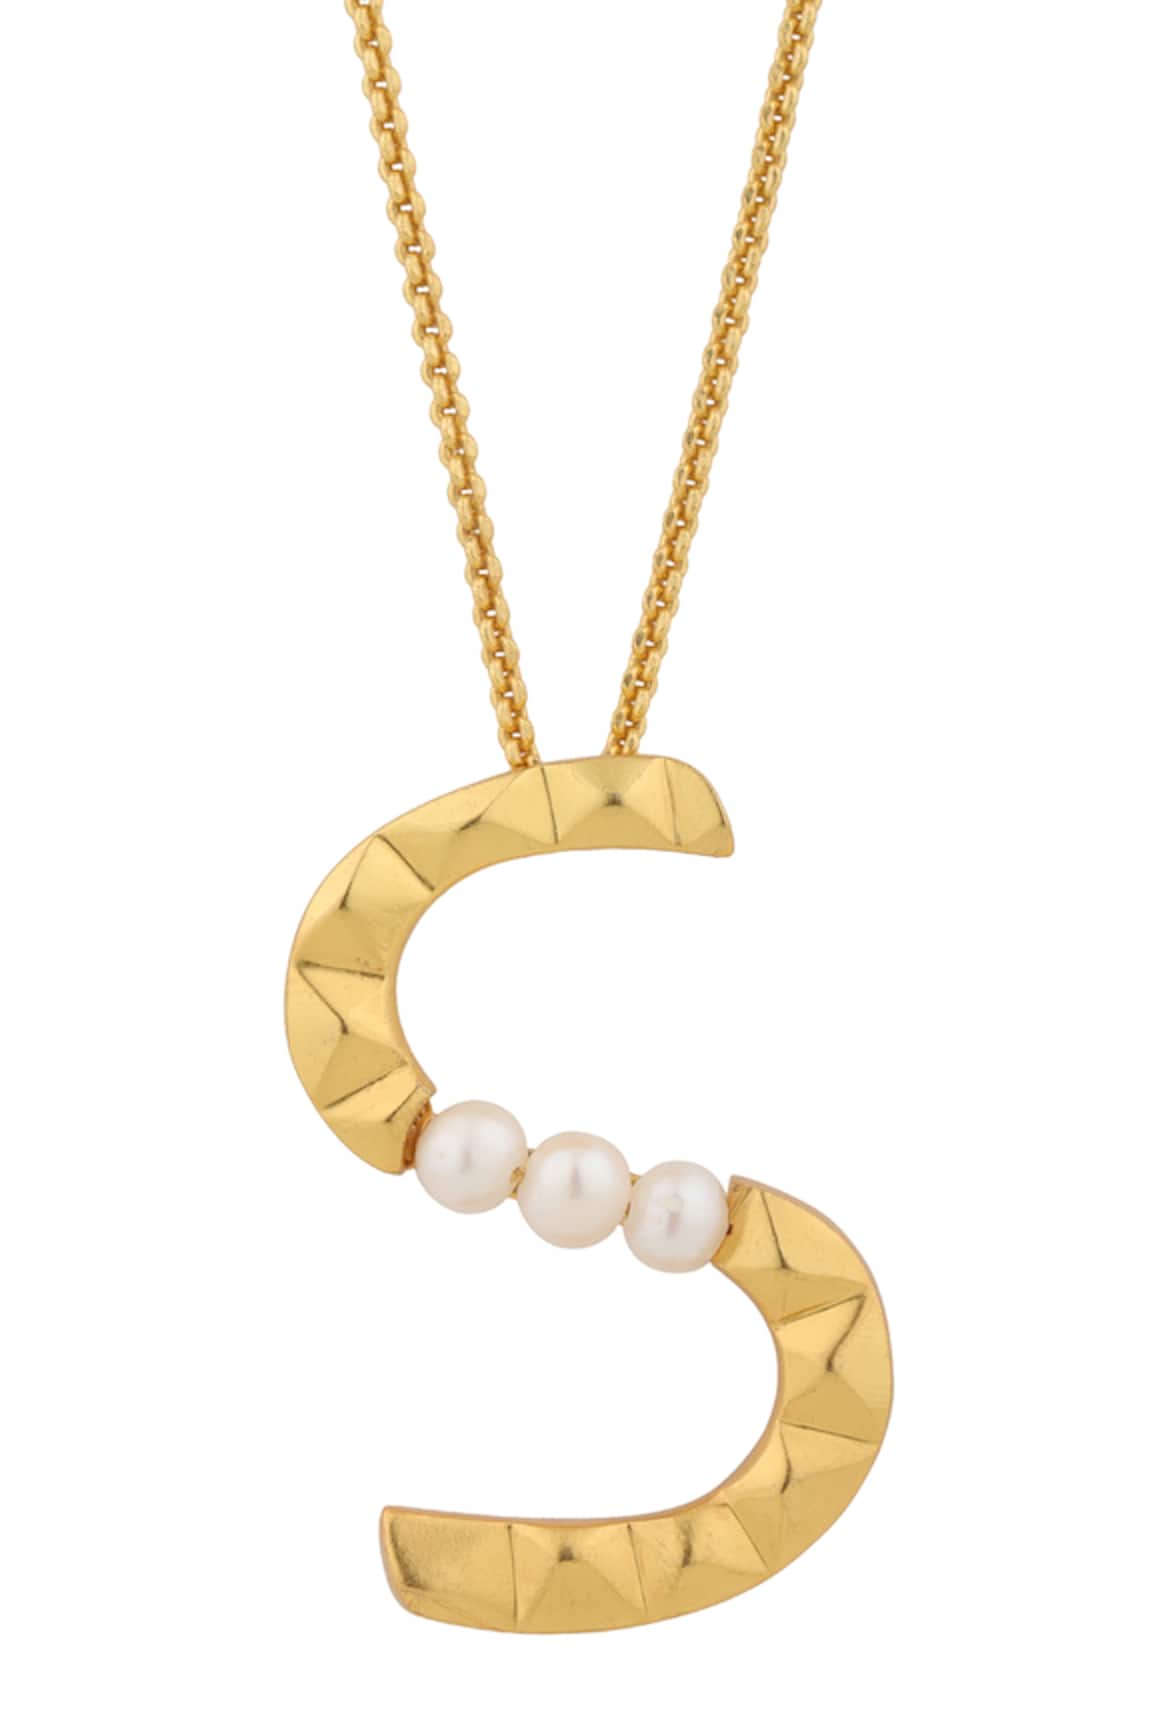 Anaash S - Initial Pendant Necklace